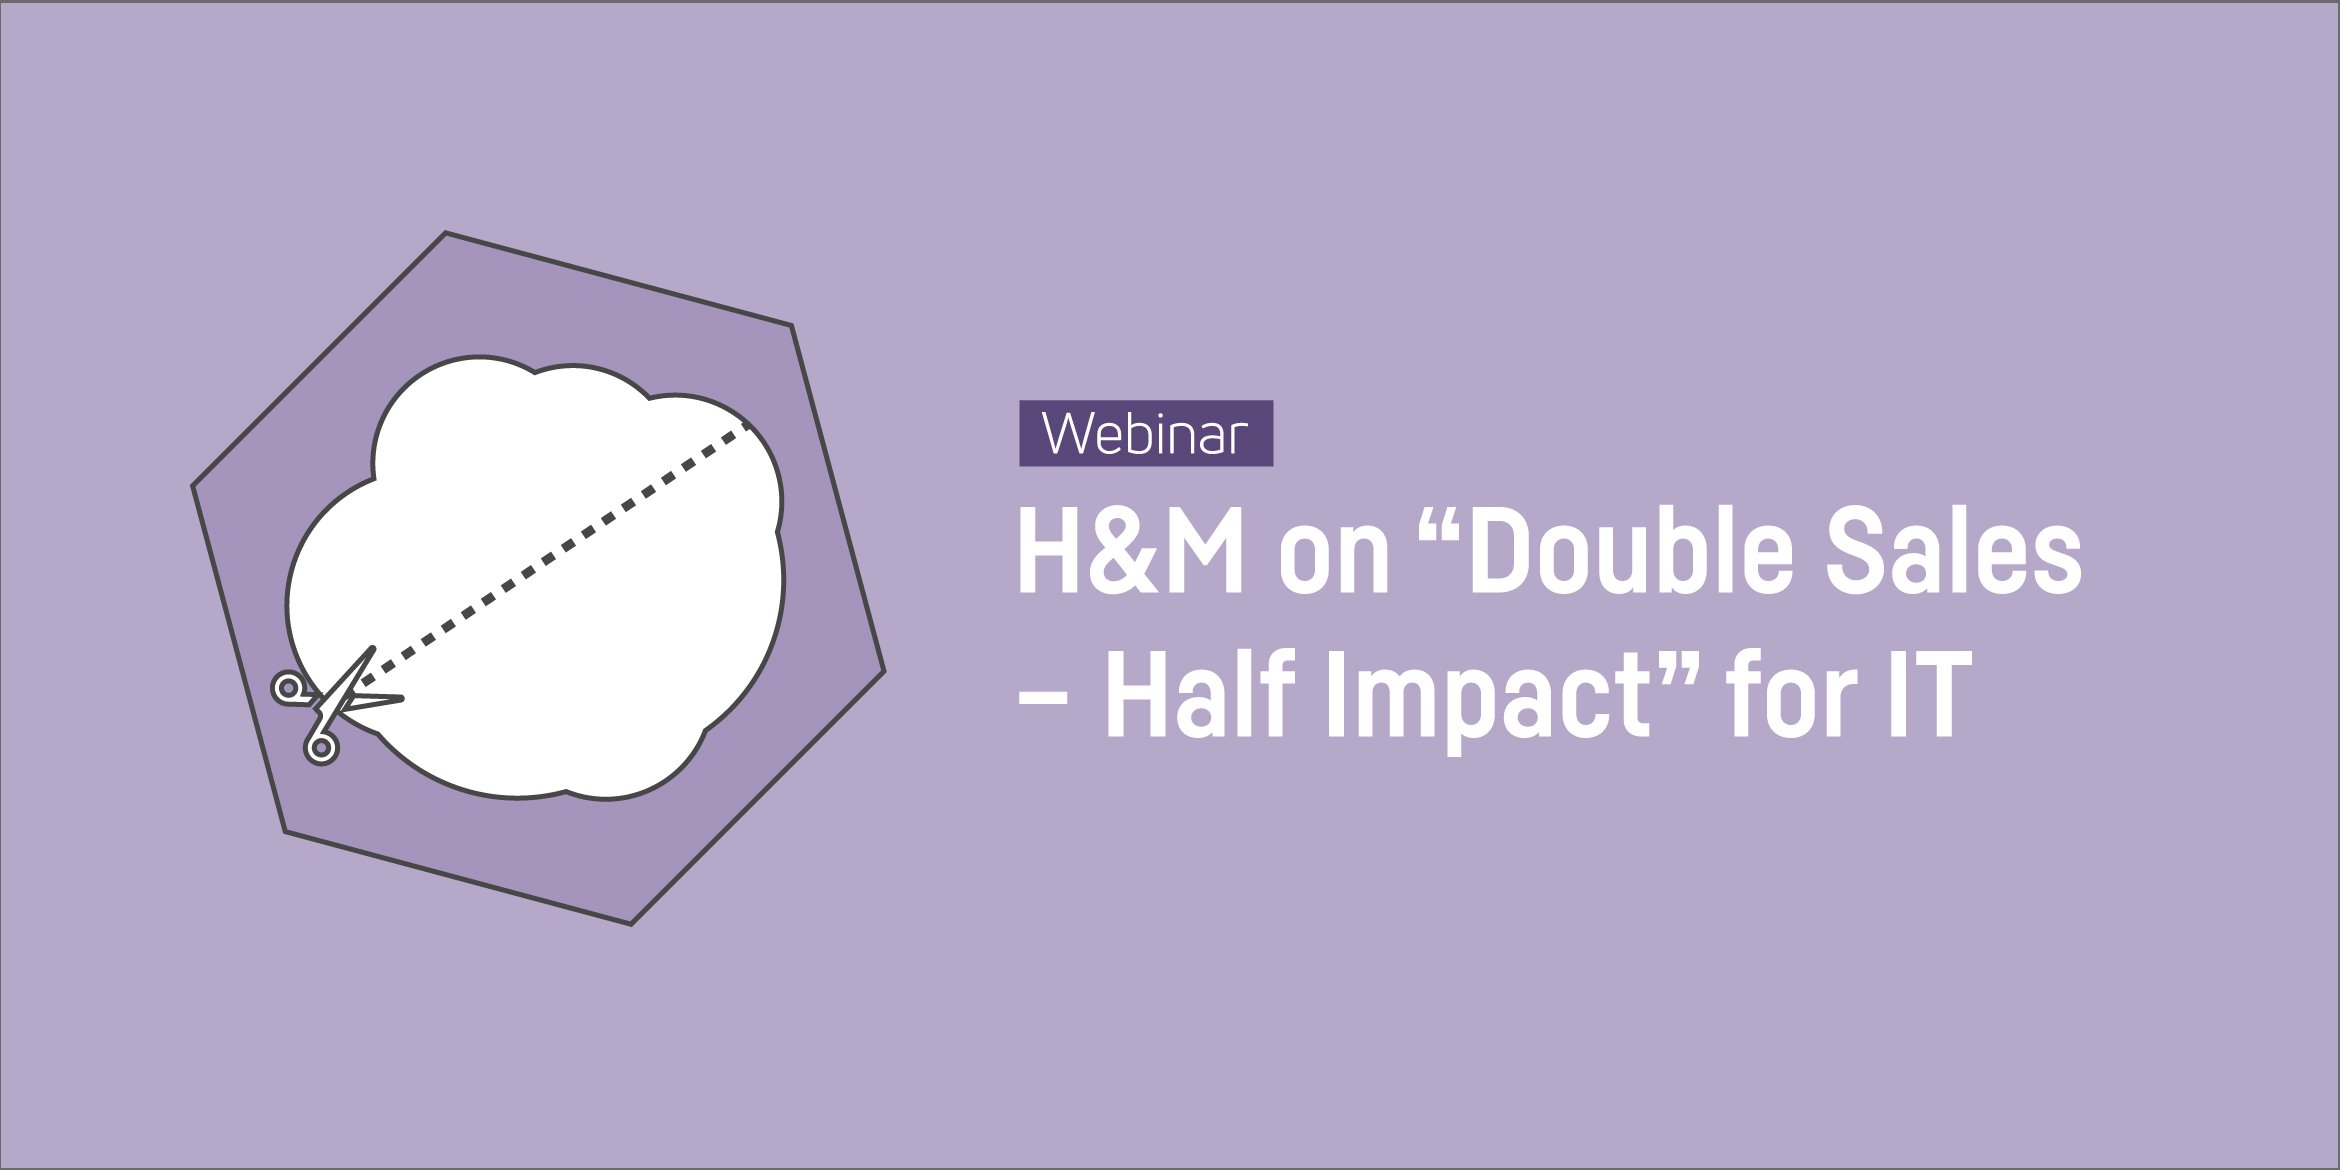 Webinar: H&M on “Double Sales – Half Impact” for IT